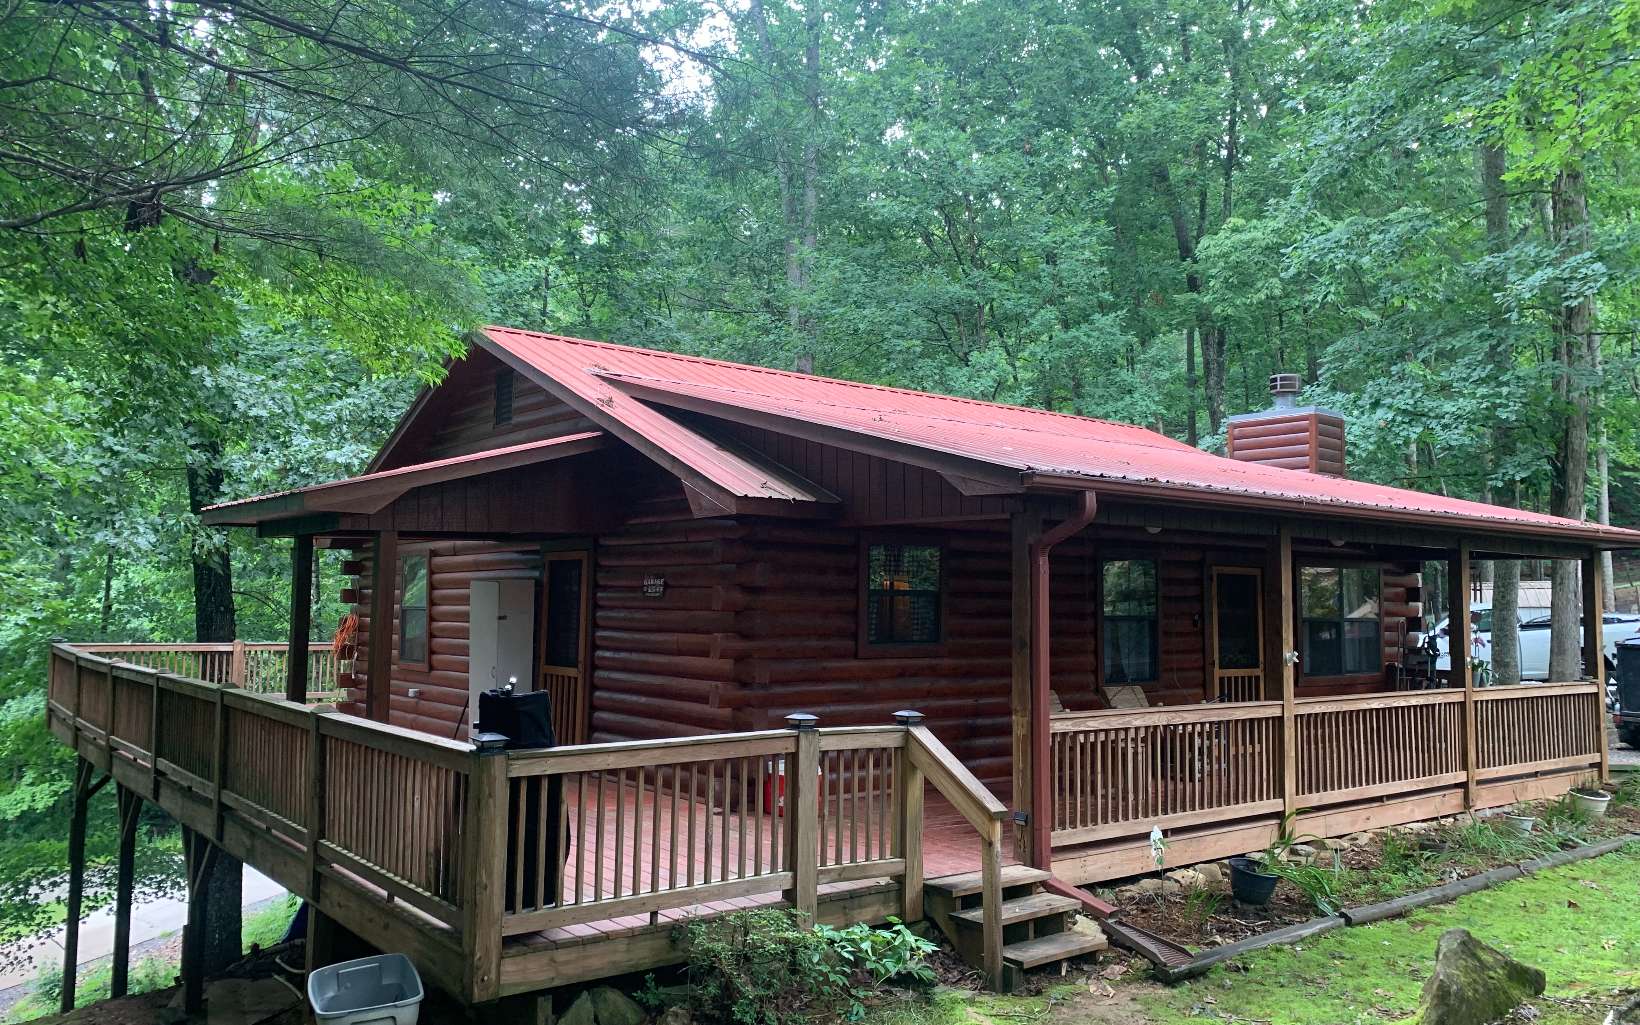 Beautiful well kept Log Home that is in a very quiet and very peaceful neighborhood that sits in a location that is out in the woods but close to Blue Ridge and even closer to Blairsville! If you like the outdoors, this log home is close to Lake Nottley and USFS land is just minutes up the road that has hiking,fishing,camping or just riding the forest service roads. Come and sit on the deck and enjoy the nature! The home was stained 2 years ago. Newley installed dishwasher. Septic was recently pumped. Come enjoy your get-a-way cabin!